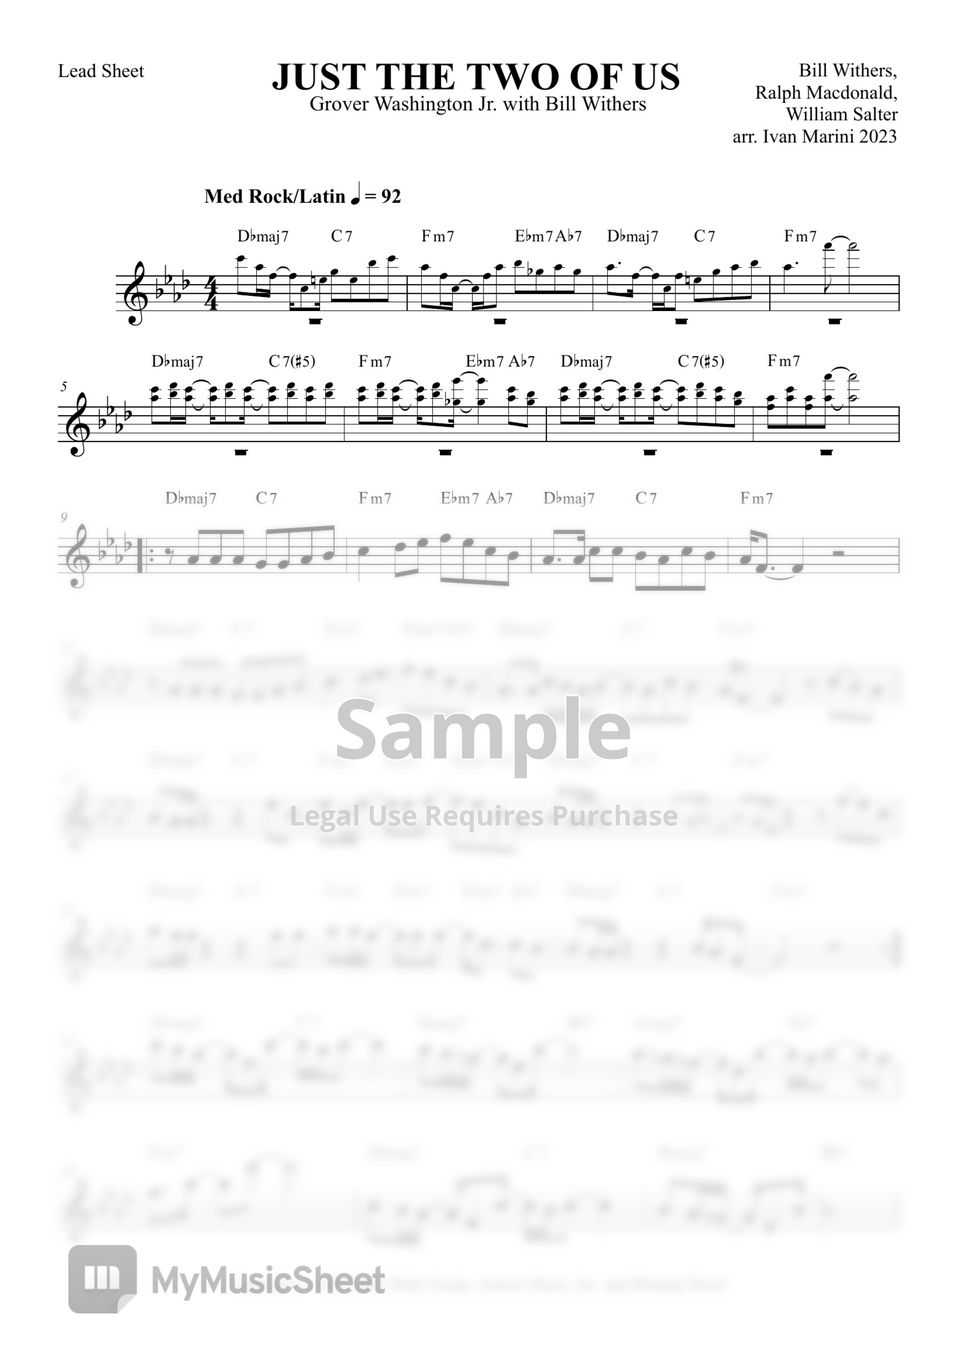 Bill Withers Just the Two of Us Sheet Music (Leadsheet) in F